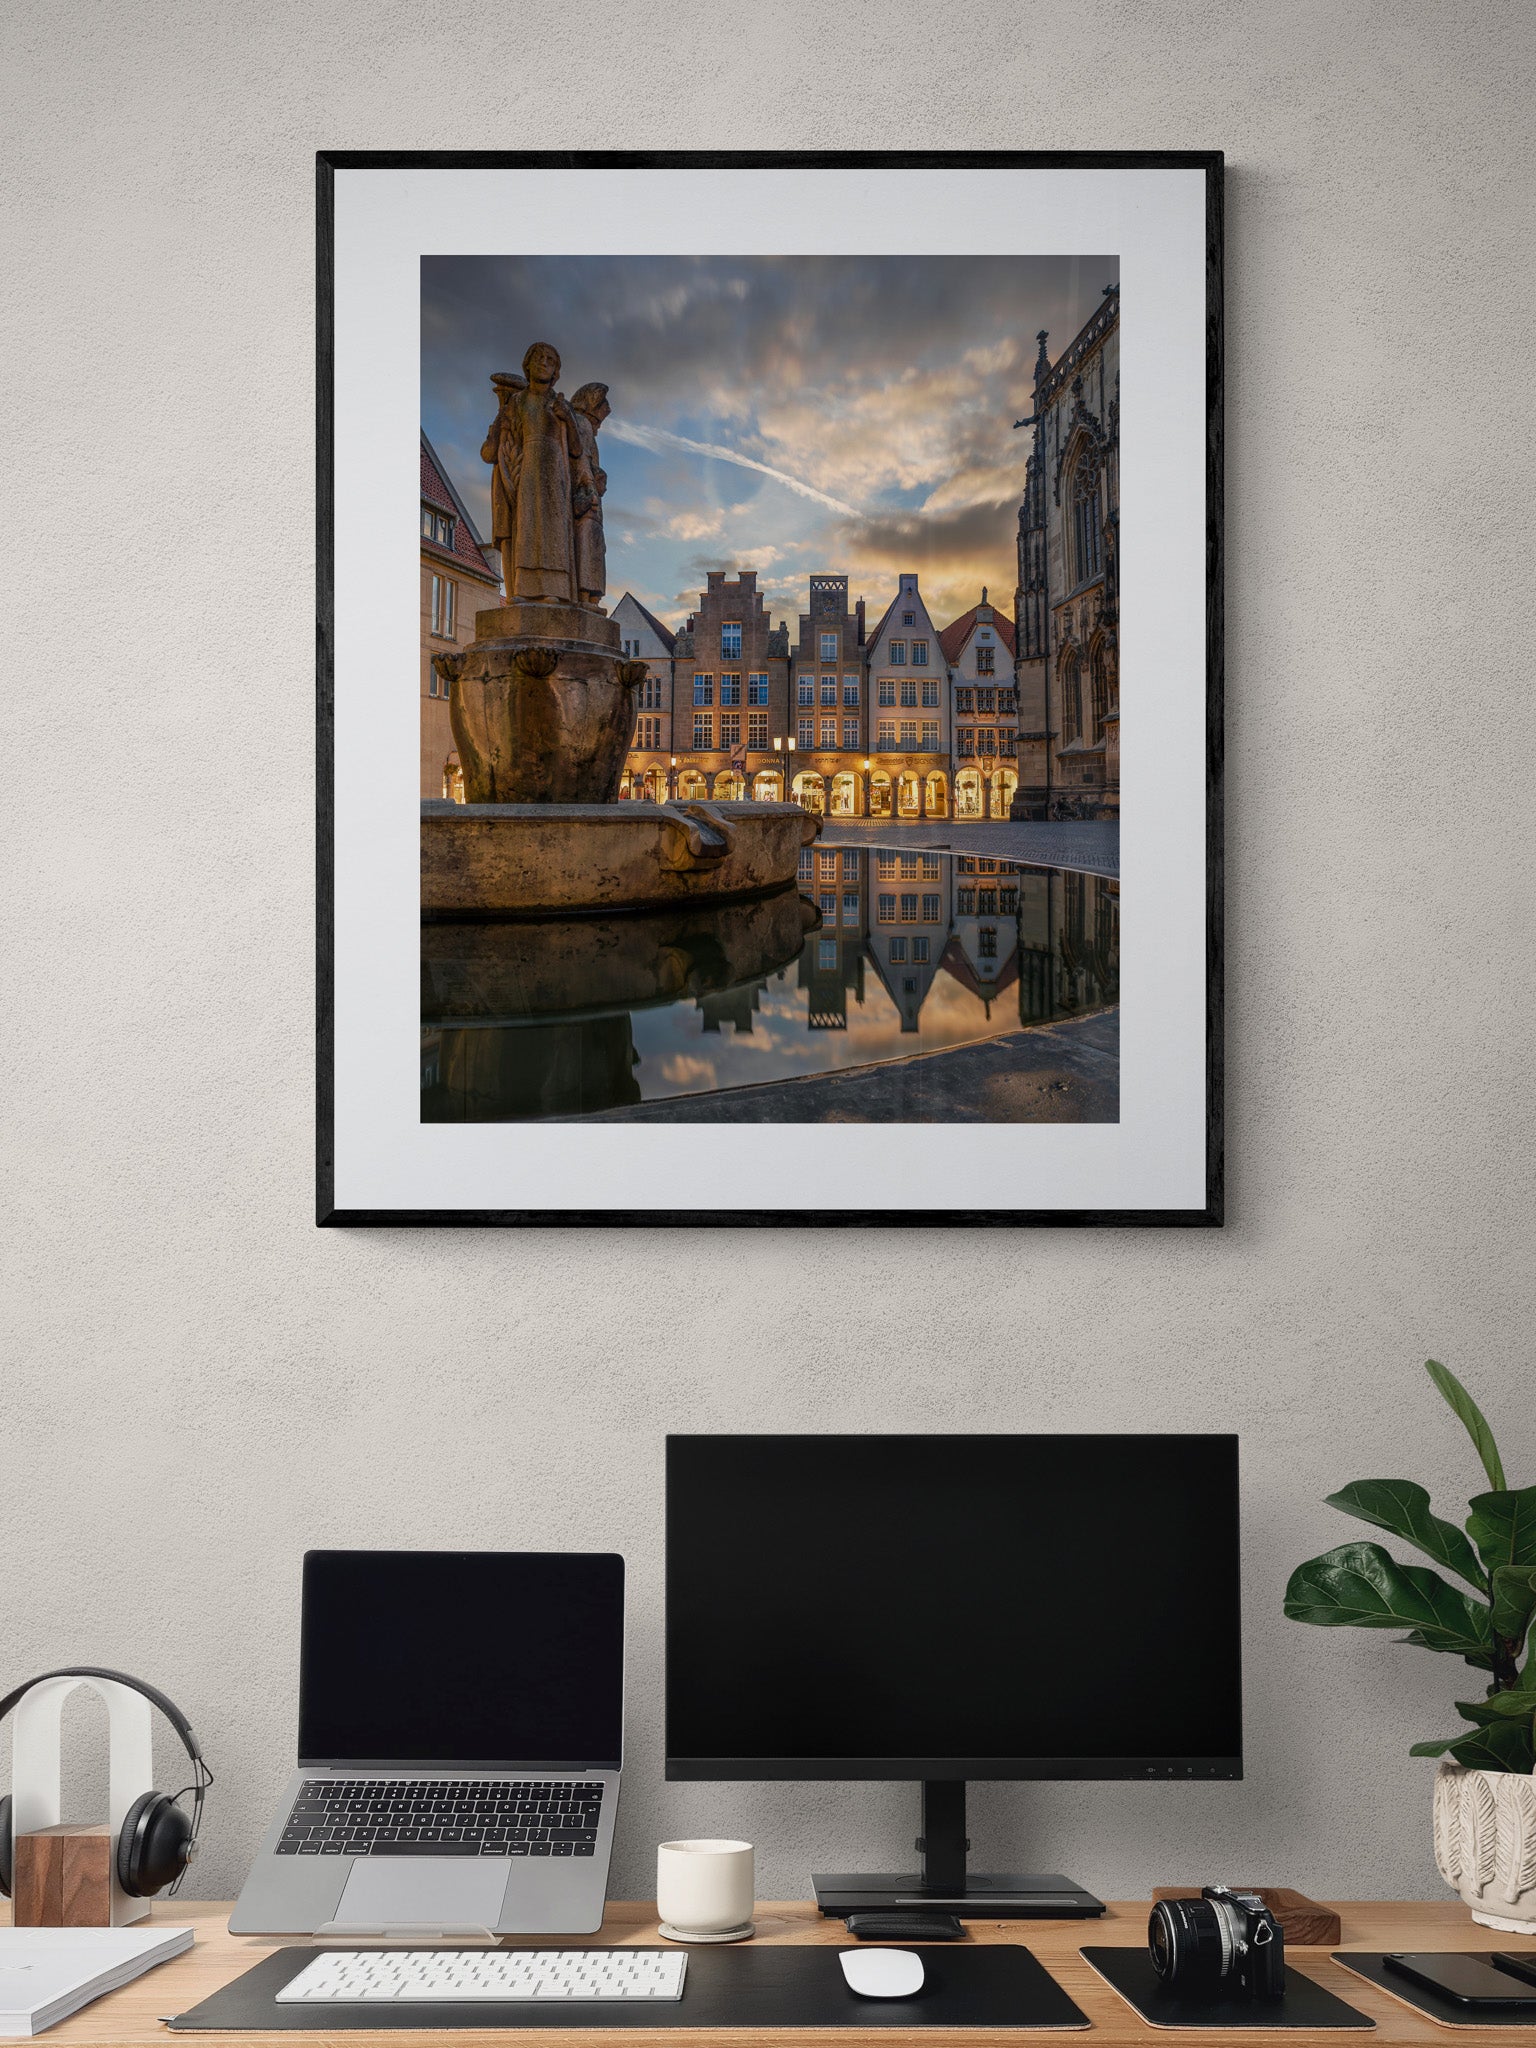 Image Title: Well, it's Münster!  Photographer: Marcus Danz Location: Münster, Germany Image description: Münster's ”Prinzipalmarkt“ is reflected in the water of a fountain during sunset. High quality Fine Art print up to 36 inch / around 90 centimeters on Hahnemühle paper available. Large variant over computer desk.